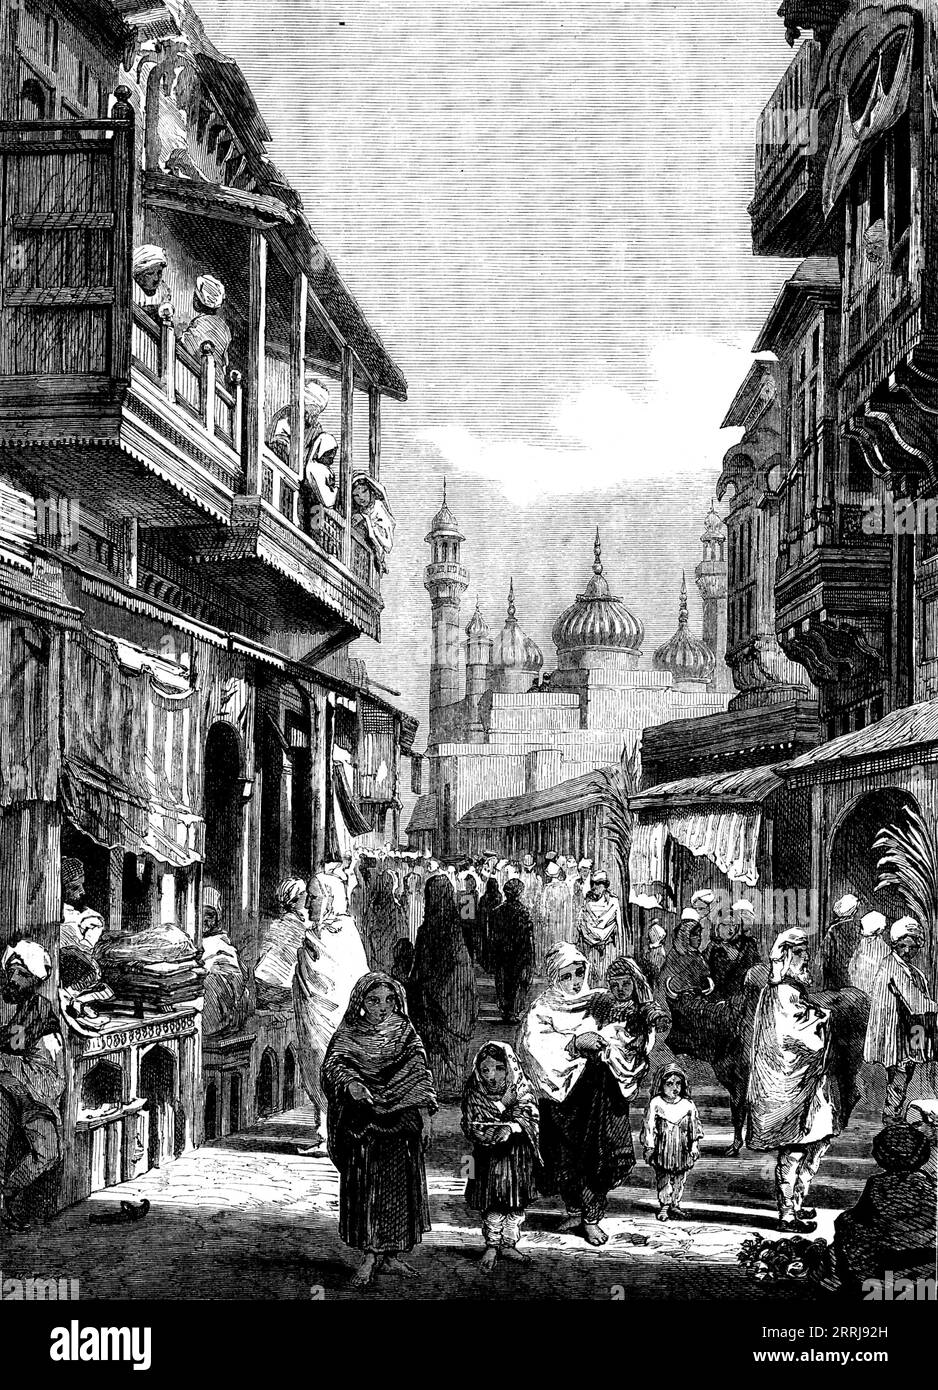 Street Scene in Lahore - from drawings by W. Carpenter, Jun., 1858. Few cities have undergone the vicissitudes to which the capital of the Punjaub has been subjected. It is on the highroad from Central Asia to the rich plains of India, which have been, the desire of every Moslem conqueror...Its brightest time was, perhaps, that when Jehangir made it his winter quarters on returning from Cashmere; and almost the only buildings of importance now remaining date from that period. But its present aspect was given to it during the sovereignty of Runjeet Singh, who built the walls and ditch (about fo Stock Photo